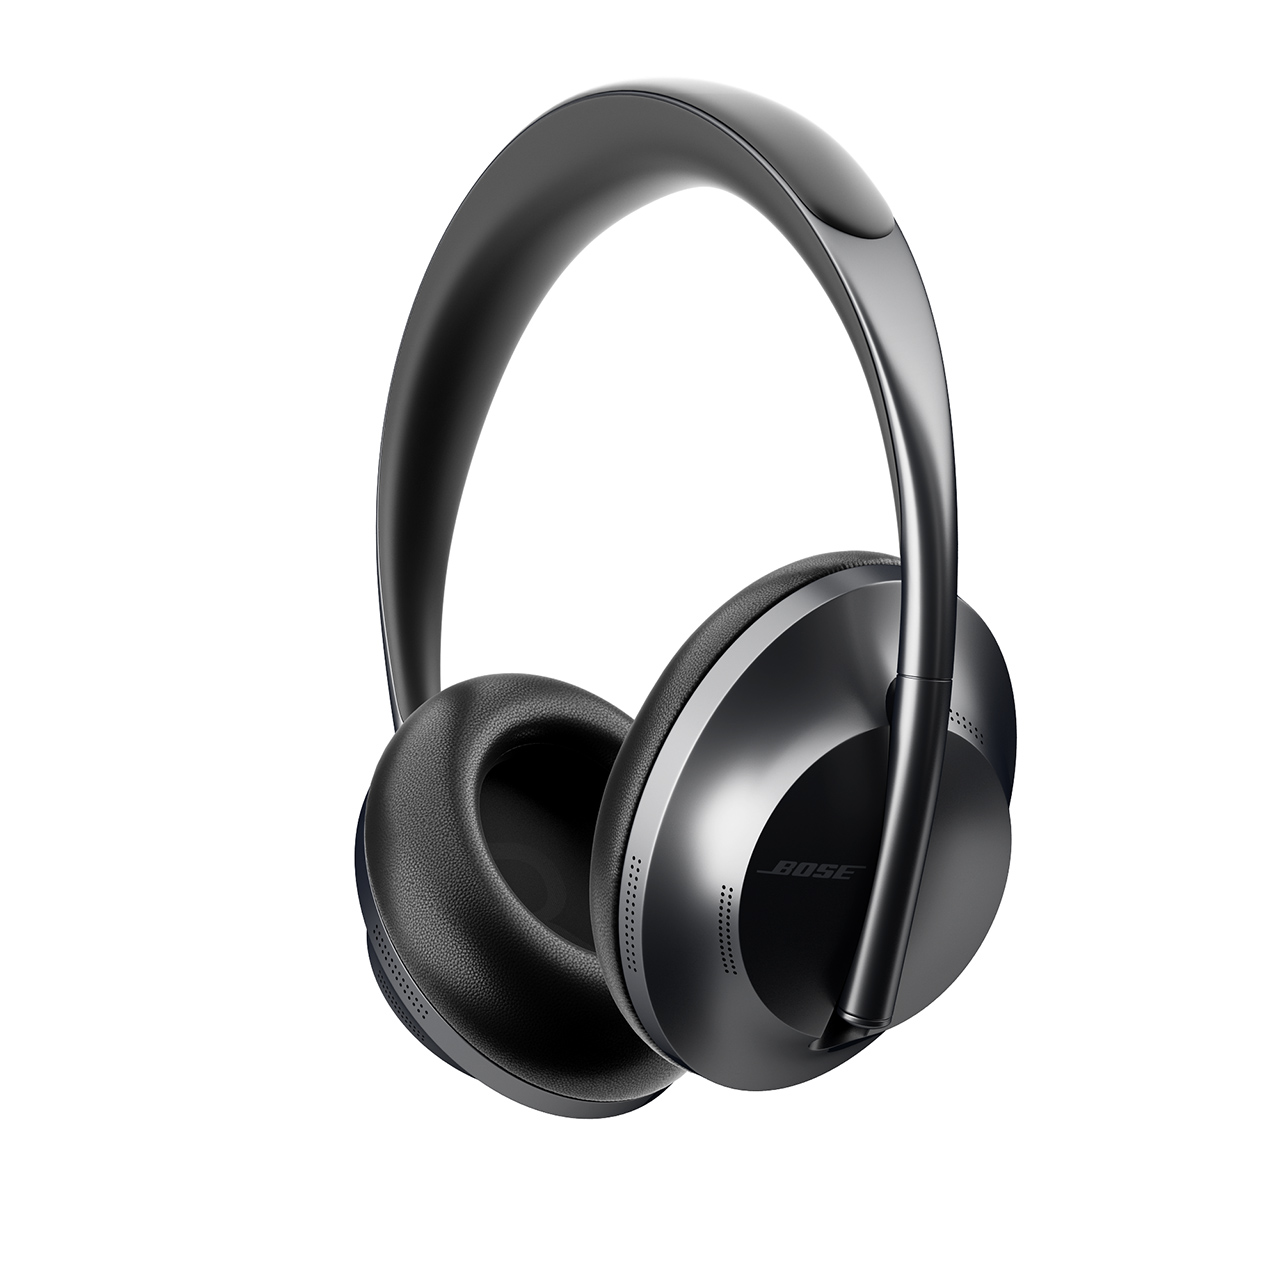 Noise Cancelling Headphones 700 Black by Bose